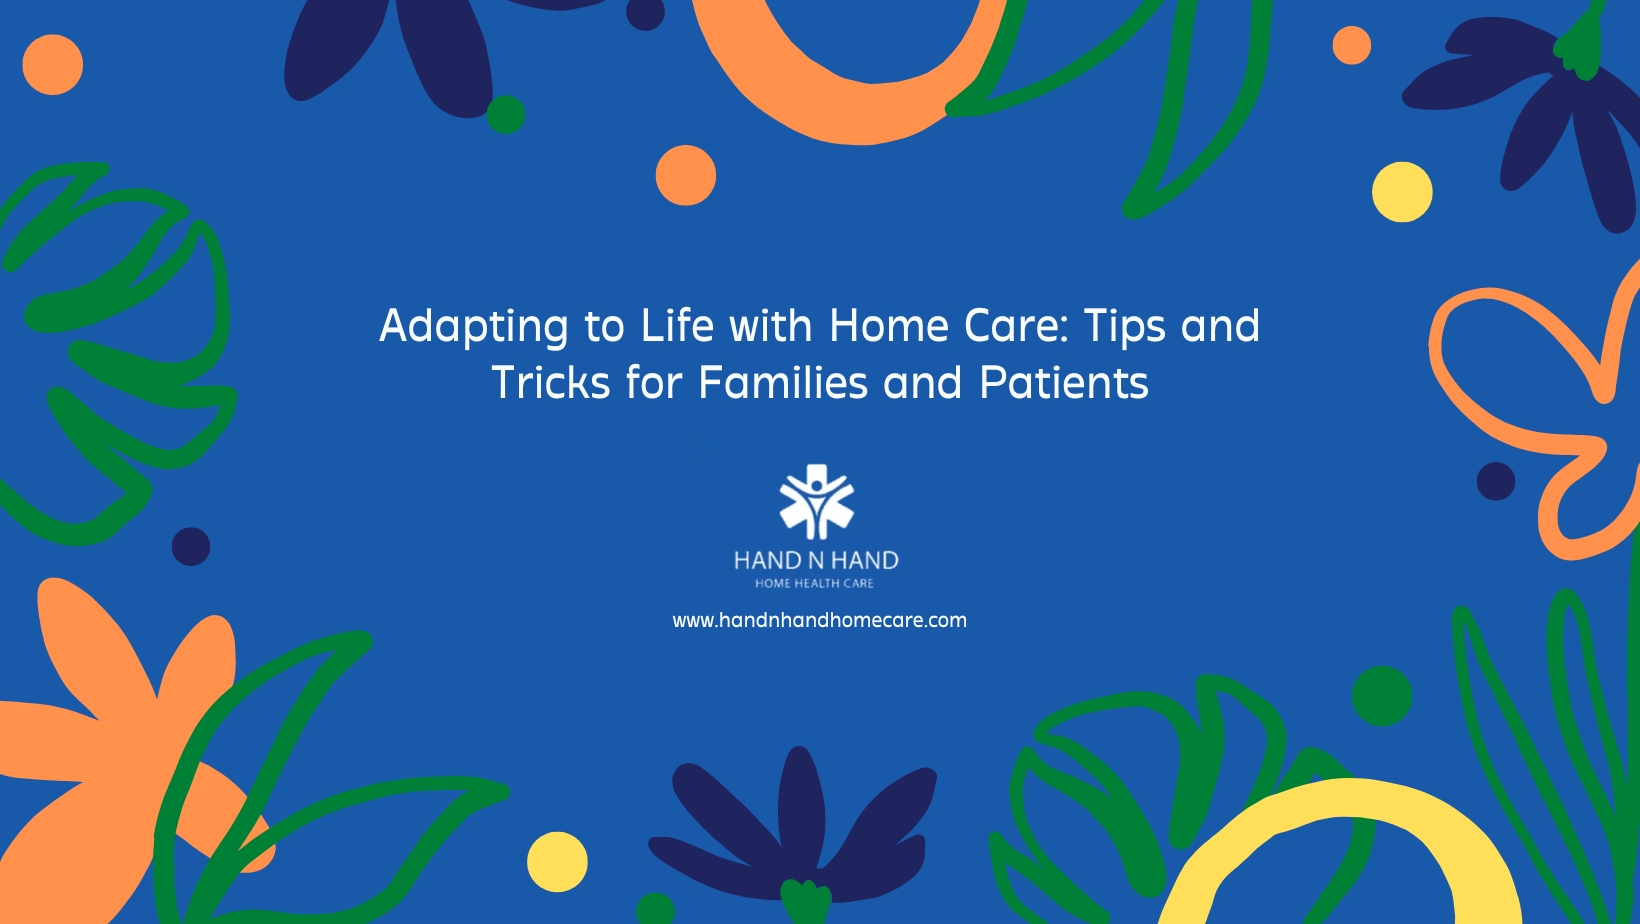 Adapting to Life with Home Care- Tips and Tricks for Families and Patients